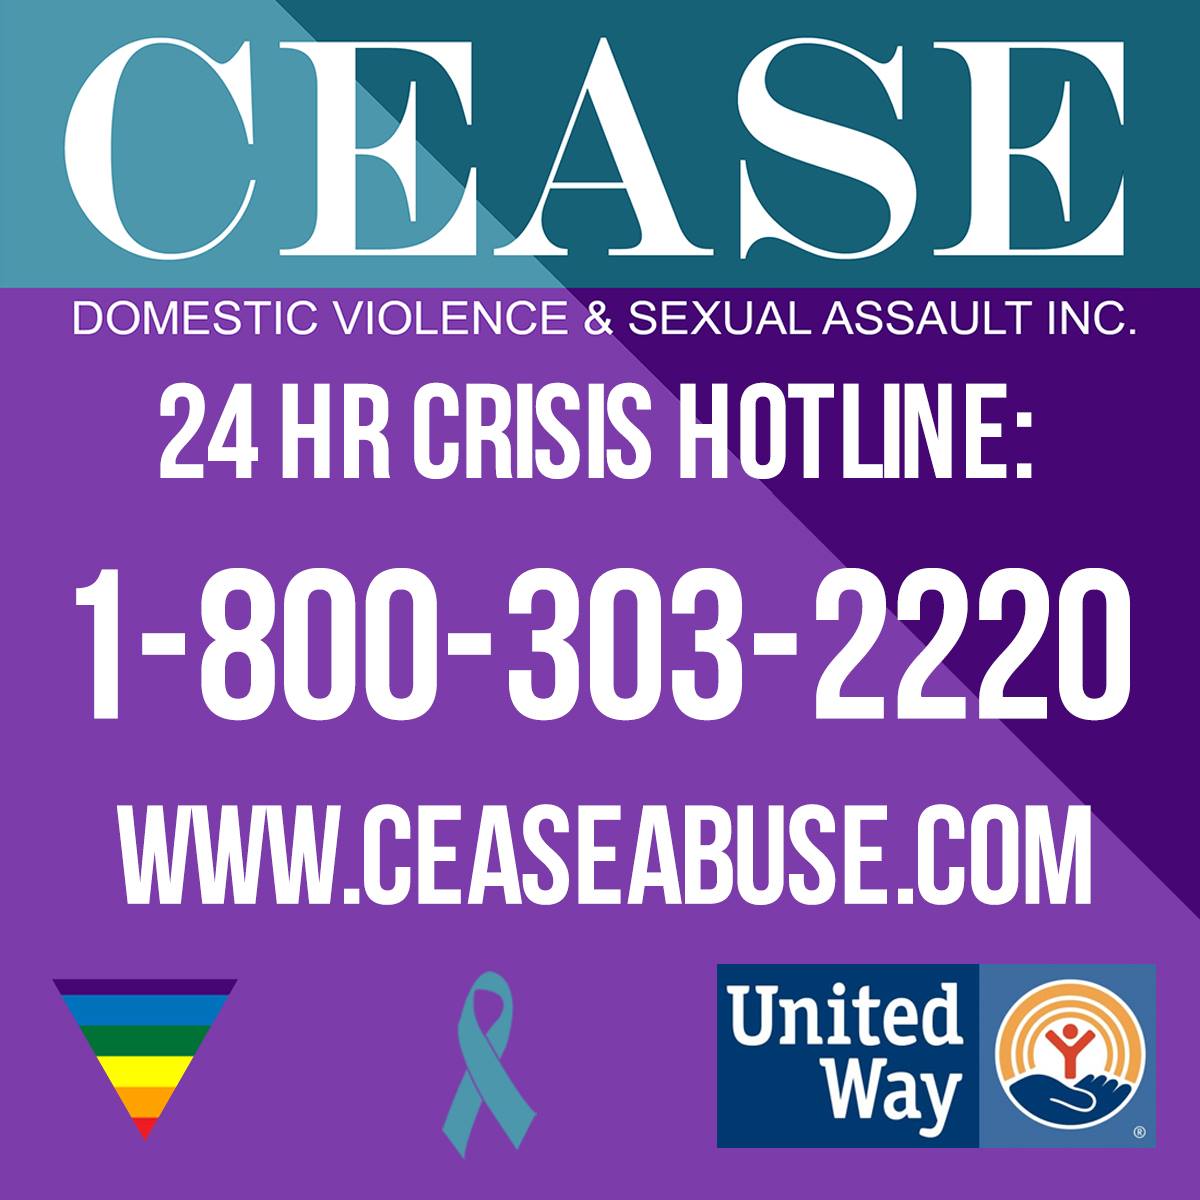 CEASE, Inc - Domestic Violence Shelter